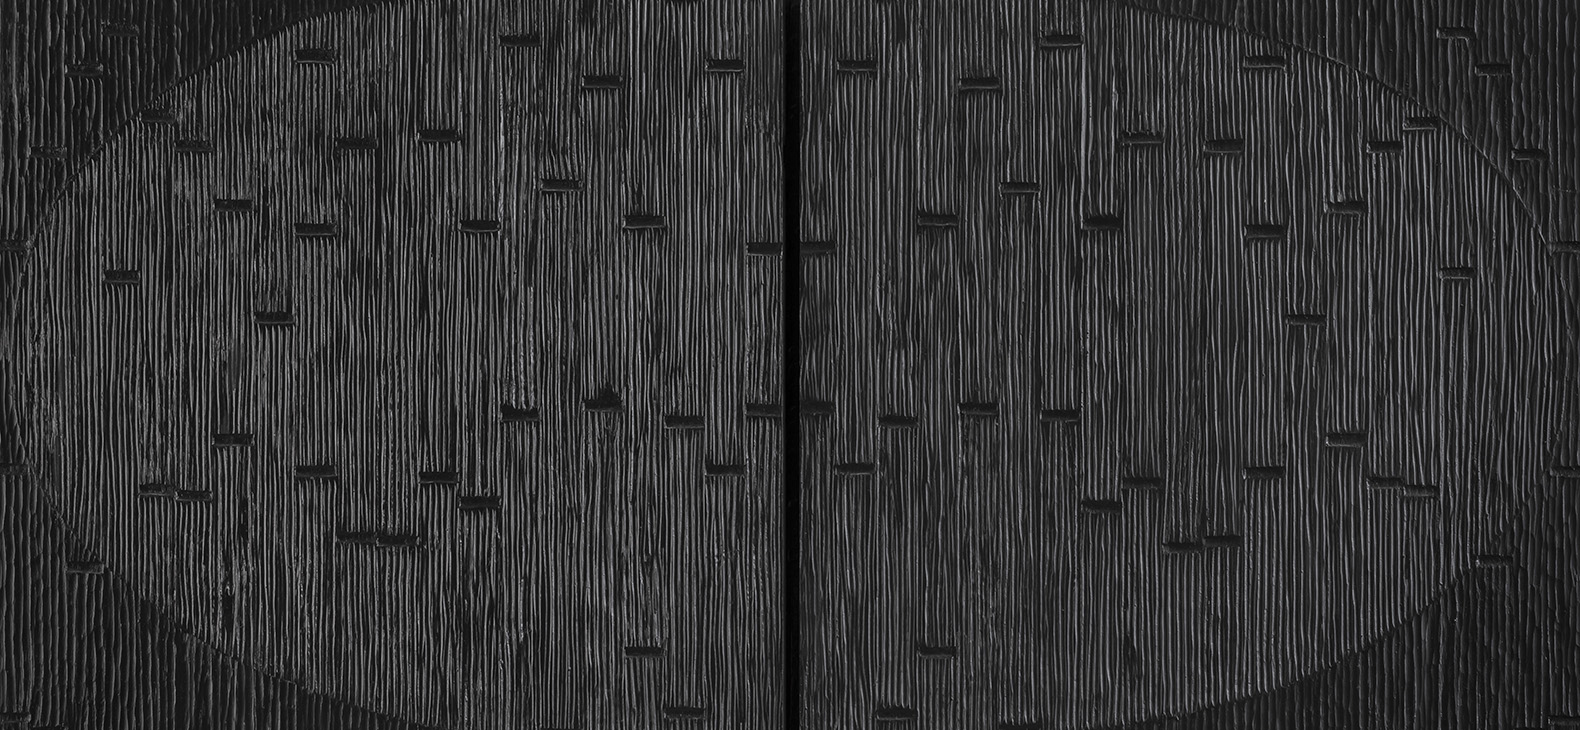 Image: Barbara Nagy: Mirror image, detail: relief of partially interrupted vertical lines in black wood; exhibition Remix 3: Light & Shadow at Schafhof - European Center for Art Upper Bavaria 2022